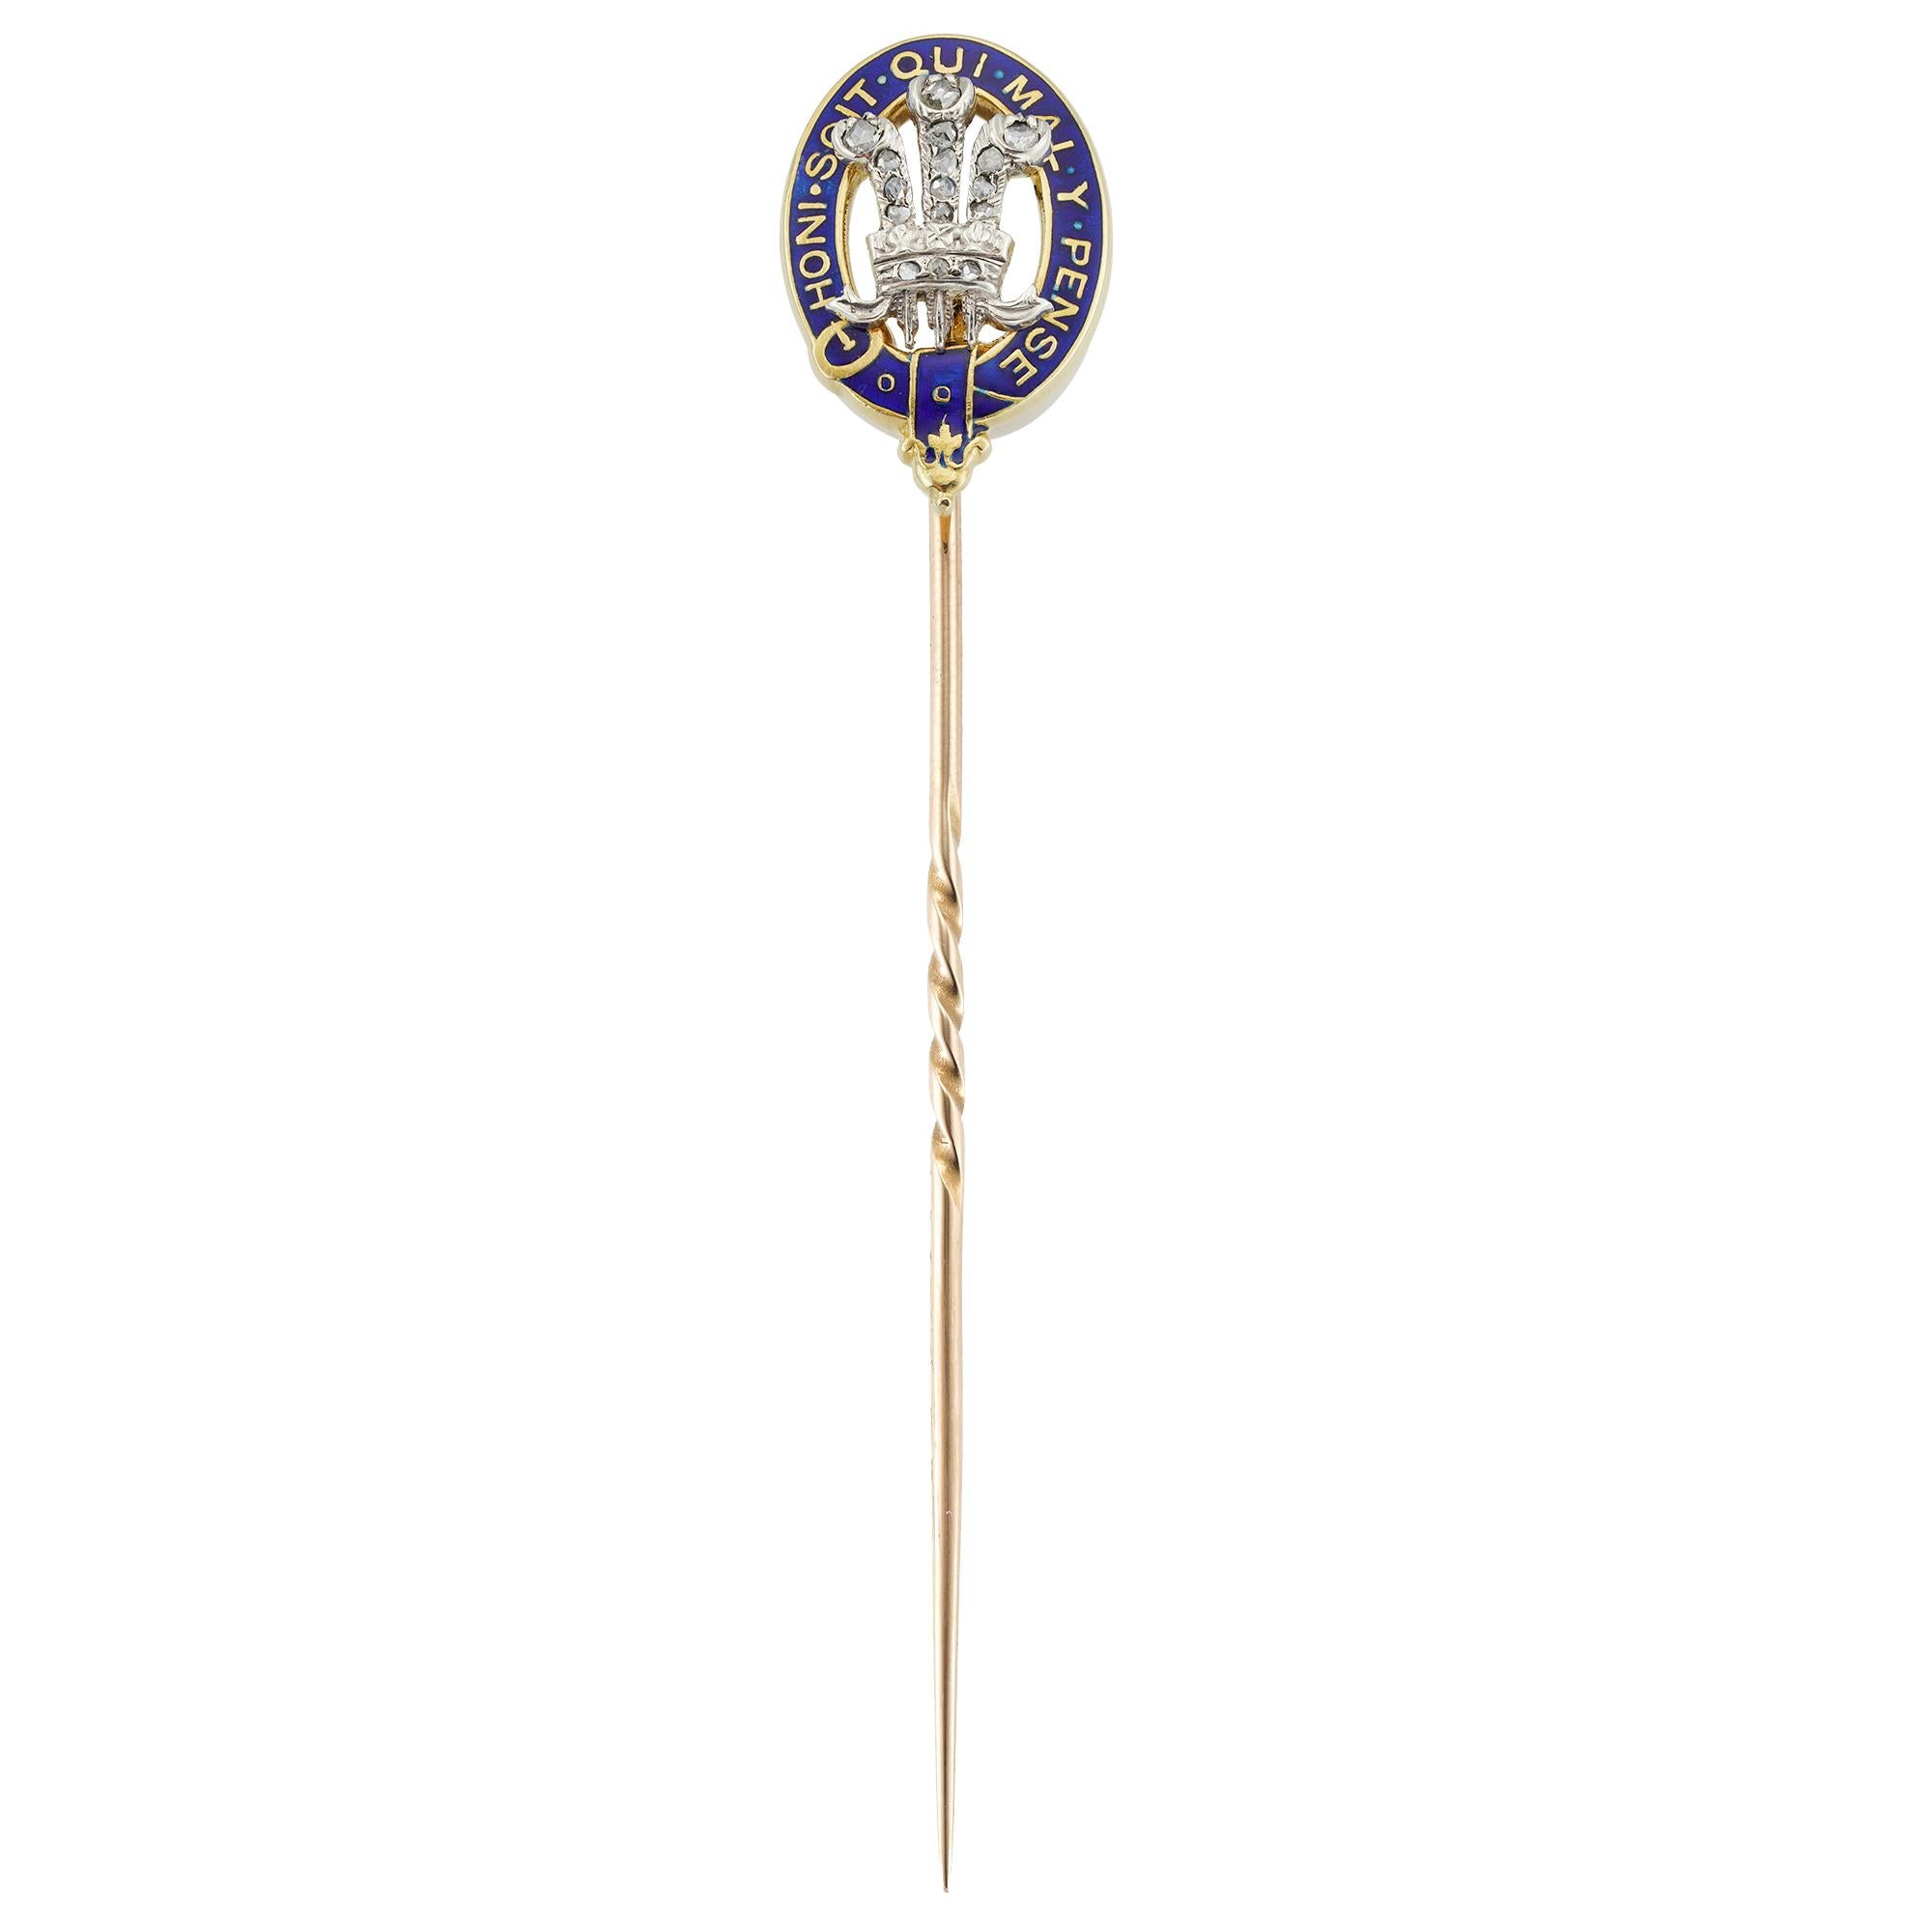 A Prince of Wales Royal Presentation stick-pin, the three feathers set with small rose-cut diamonds, surrounded by blue enamelled garter, to gold pin, circa 1905, unmarked, tested as 9ct gold, the jewelled part measuring 1.6 x 1cm, the pin measuring